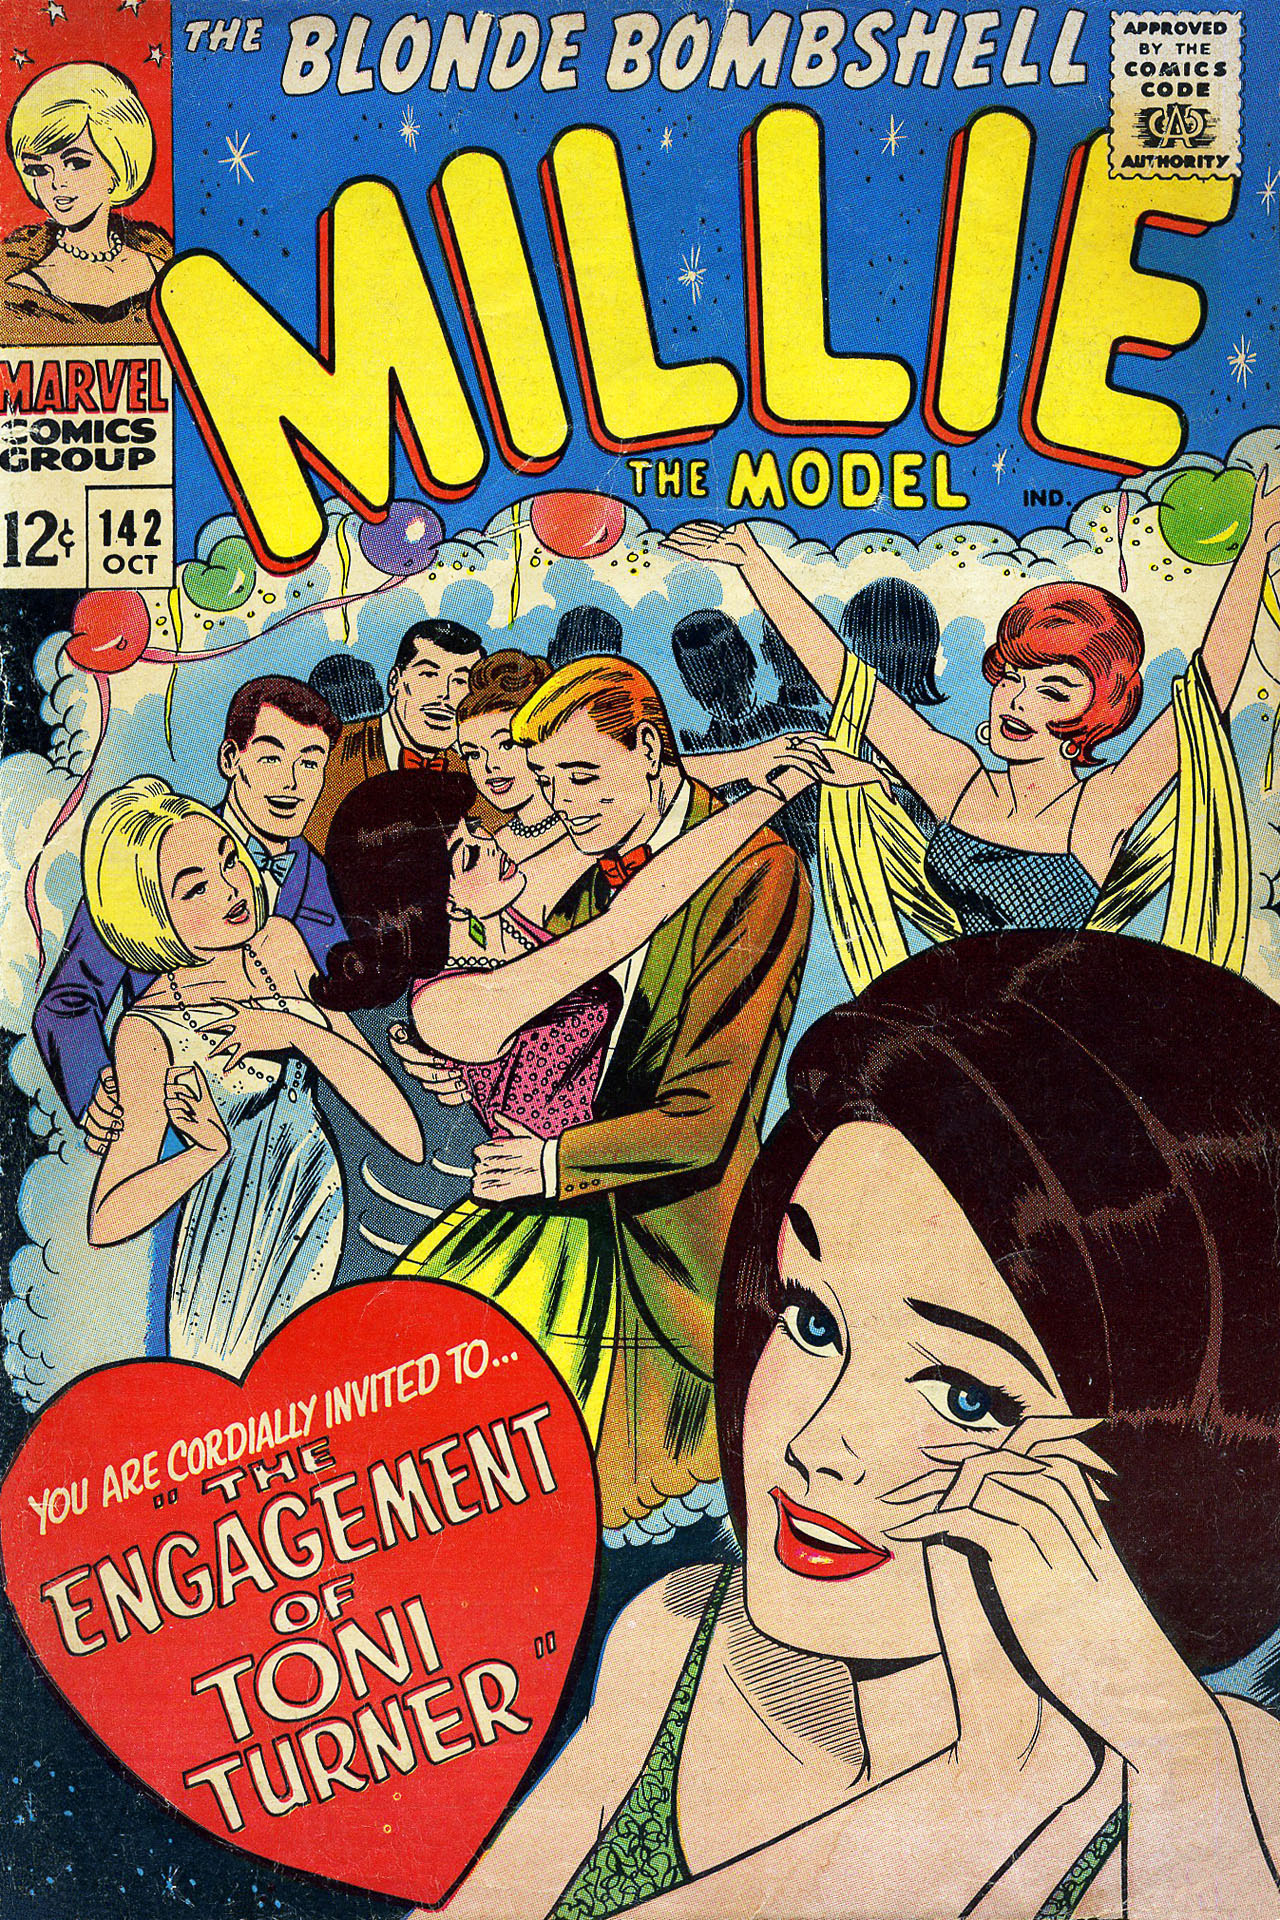 Read online Millie the Model comic -  Issue #142 - 1